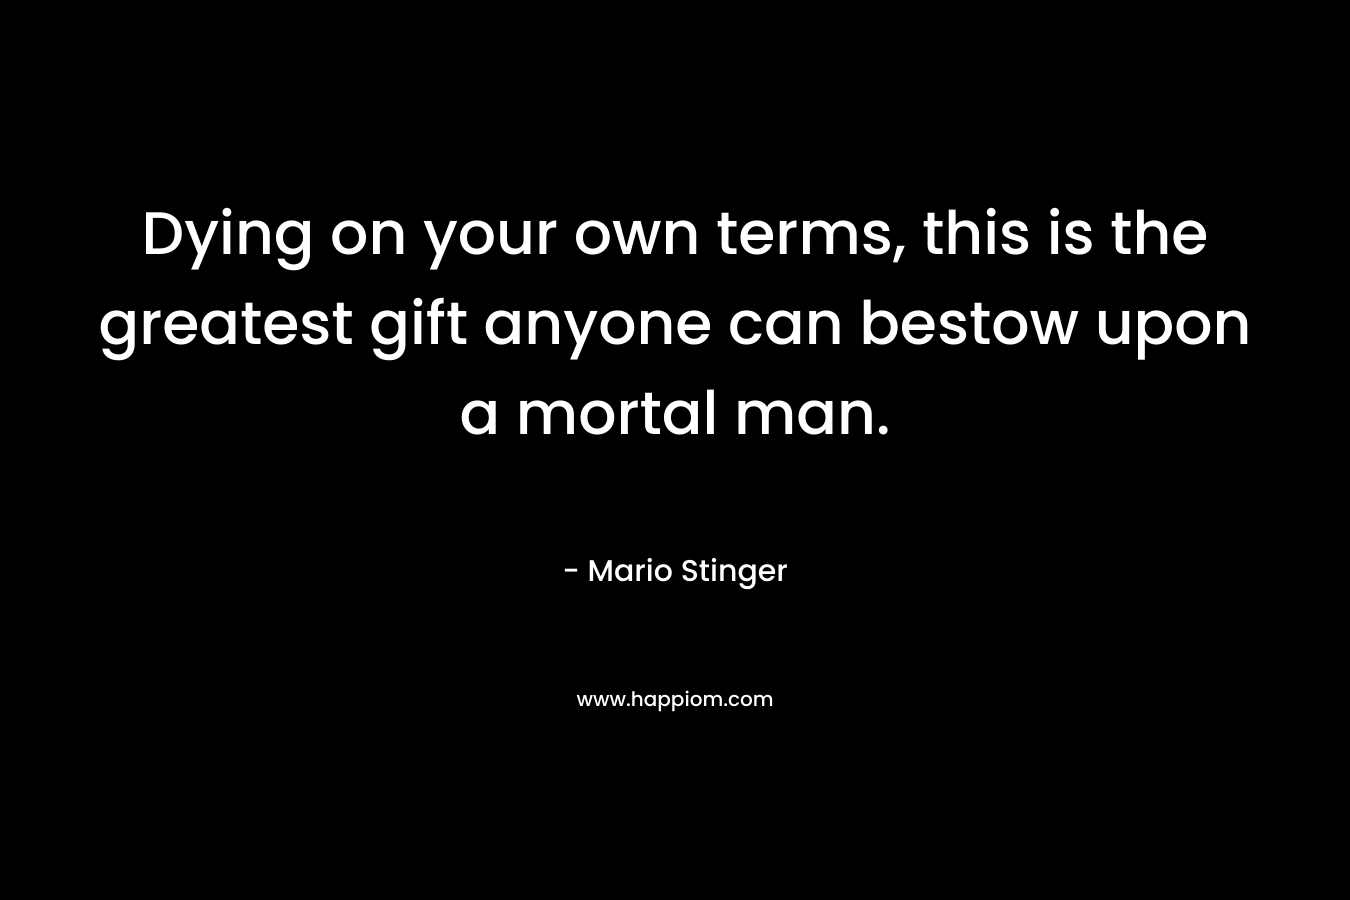 Dying on your own terms, this is the greatest gift anyone can bestow upon a mortal man. – Mario Stinger